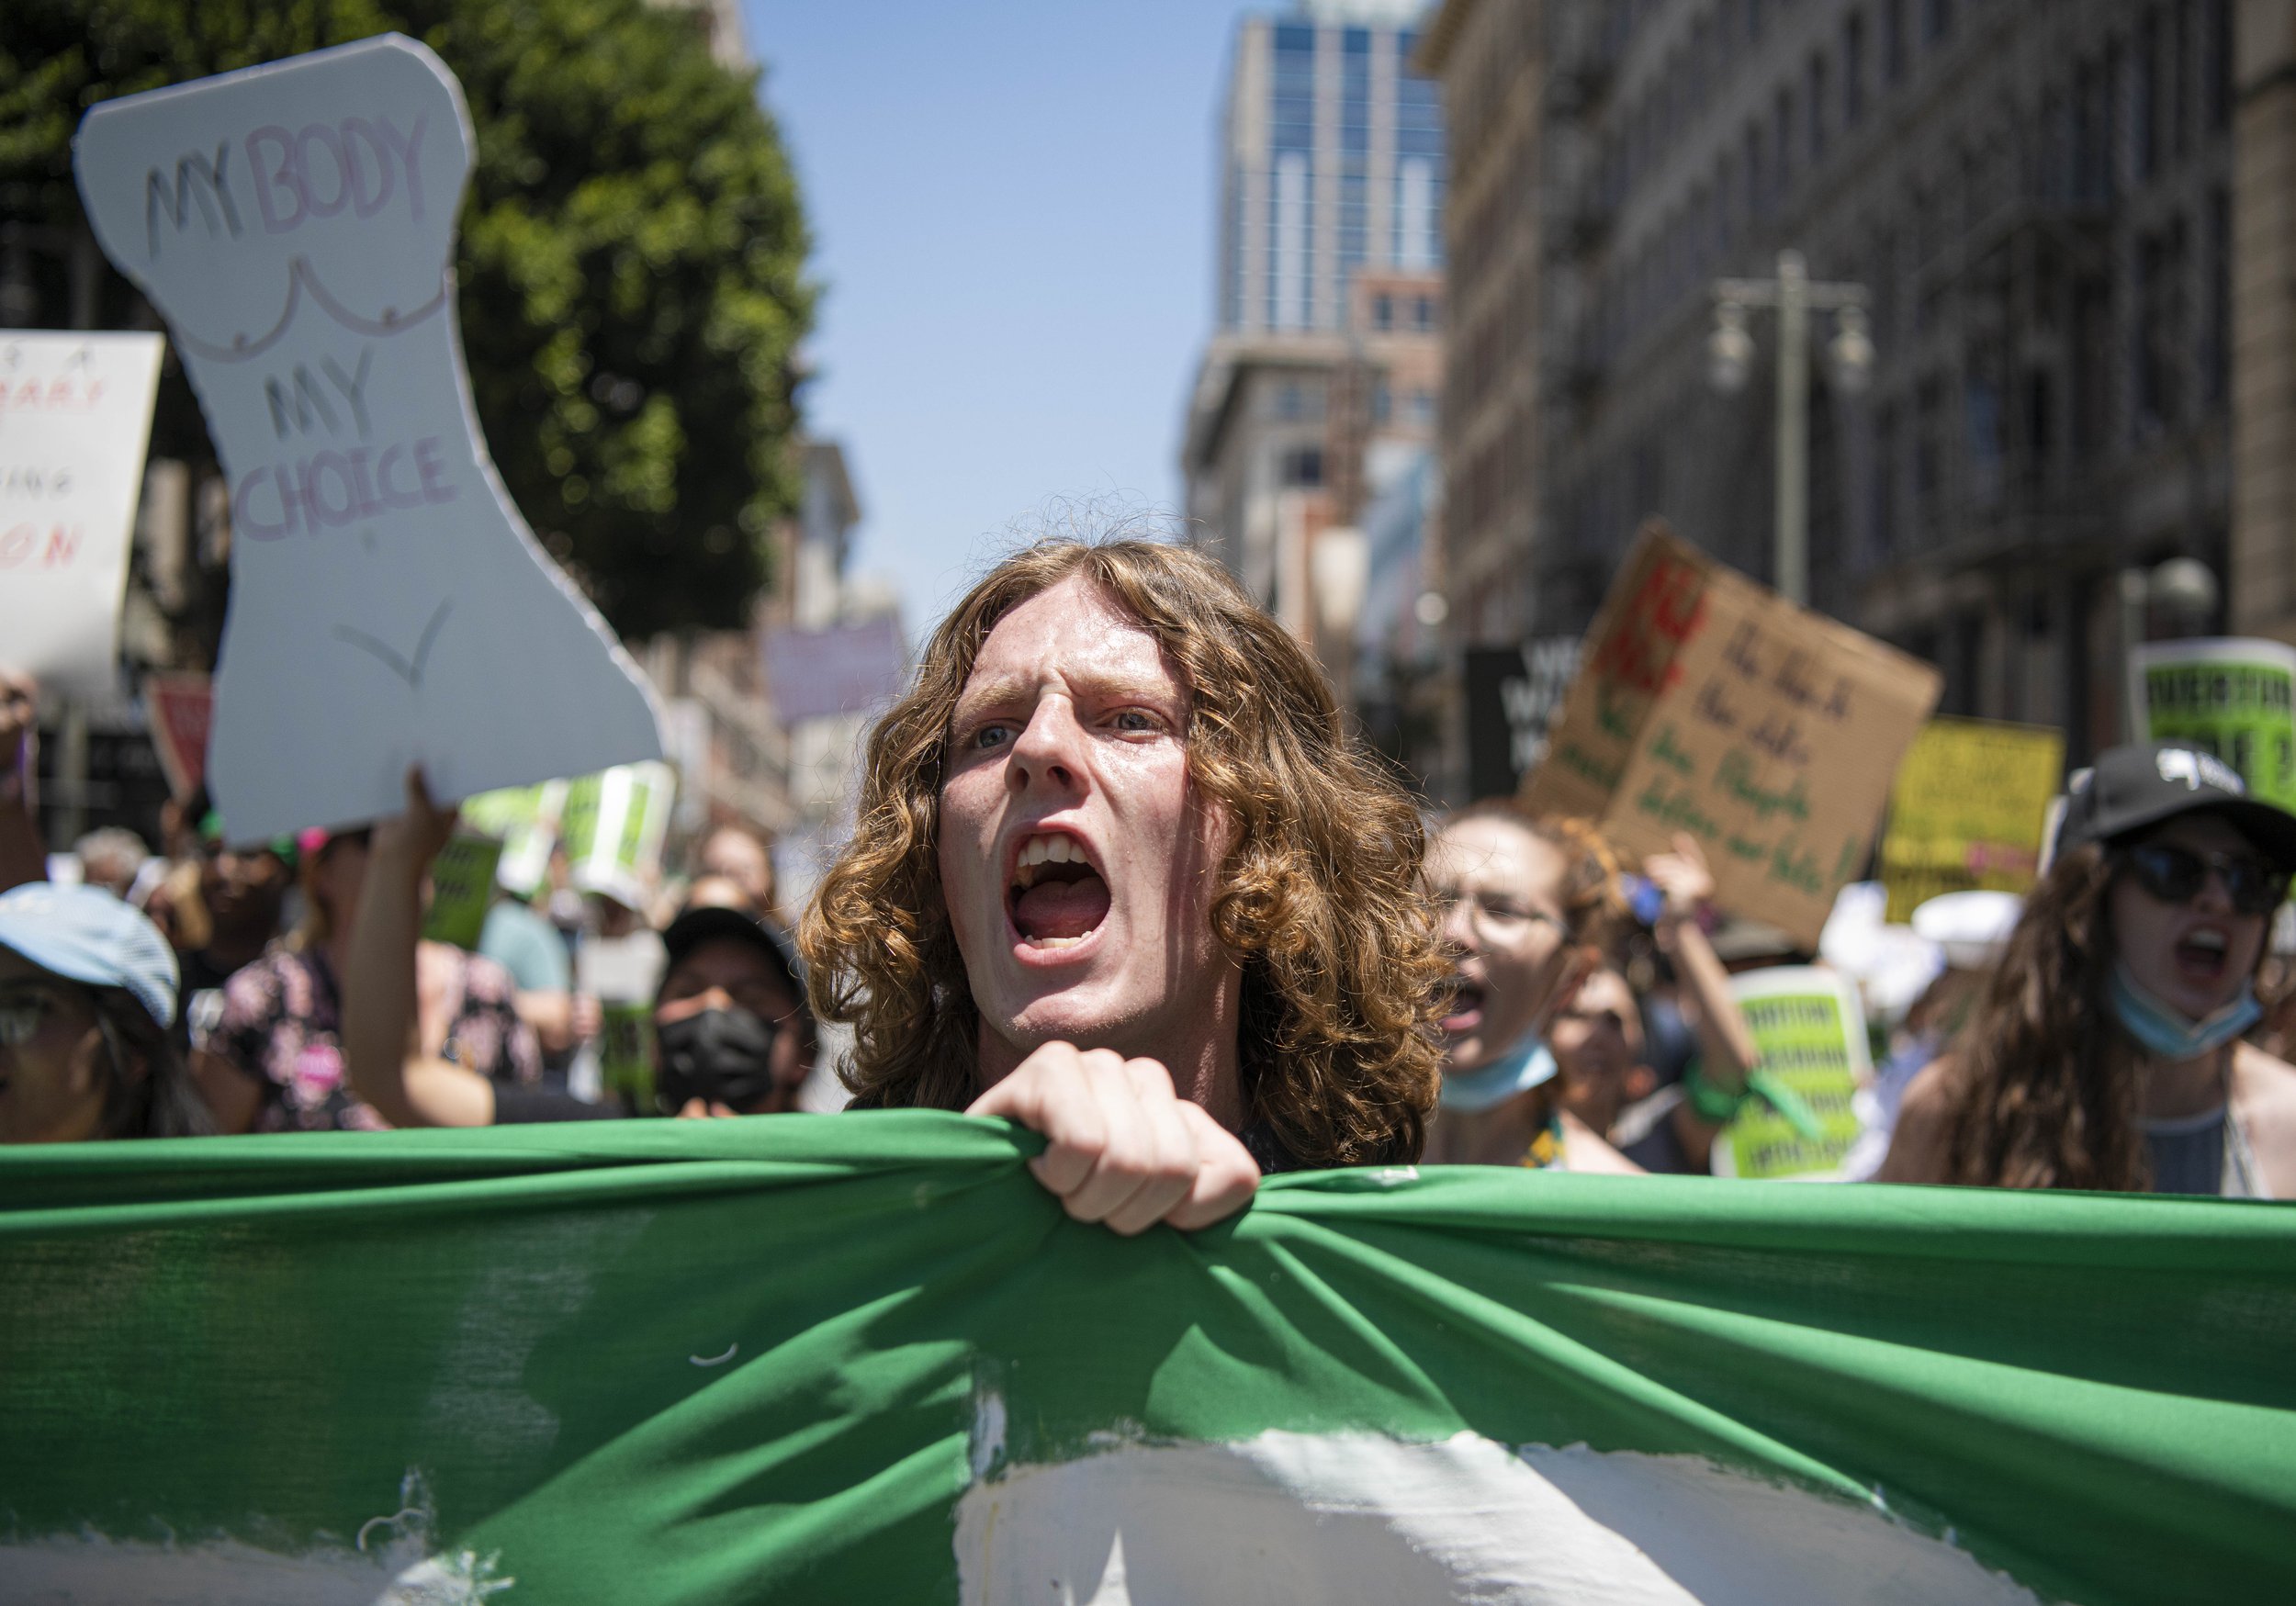  An abortion rights supporter yells as he joins in on the crowds chants on May 14, 2022, in Los Angeles, CA. (Jon Putman | The Corsair) 